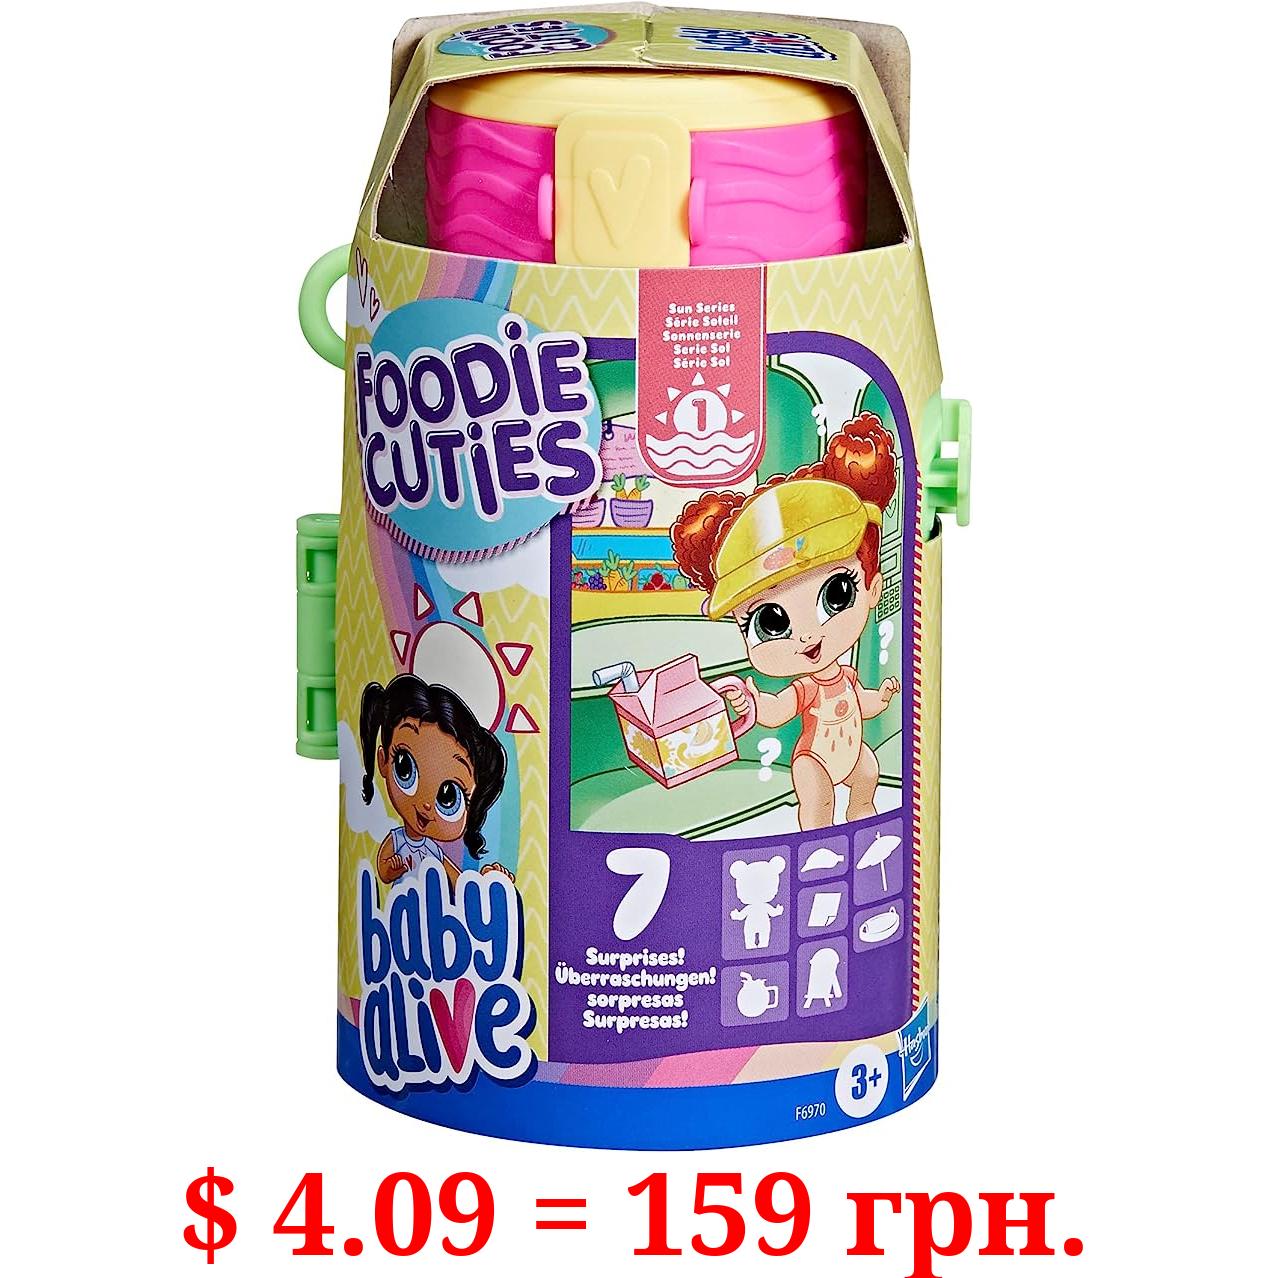 Baby Alive Foodie Cuties, Bottle, Sun Series 1, Surprise Toys for Girls, Baby Doll Set, 3-Inch, Kids 3 and Up